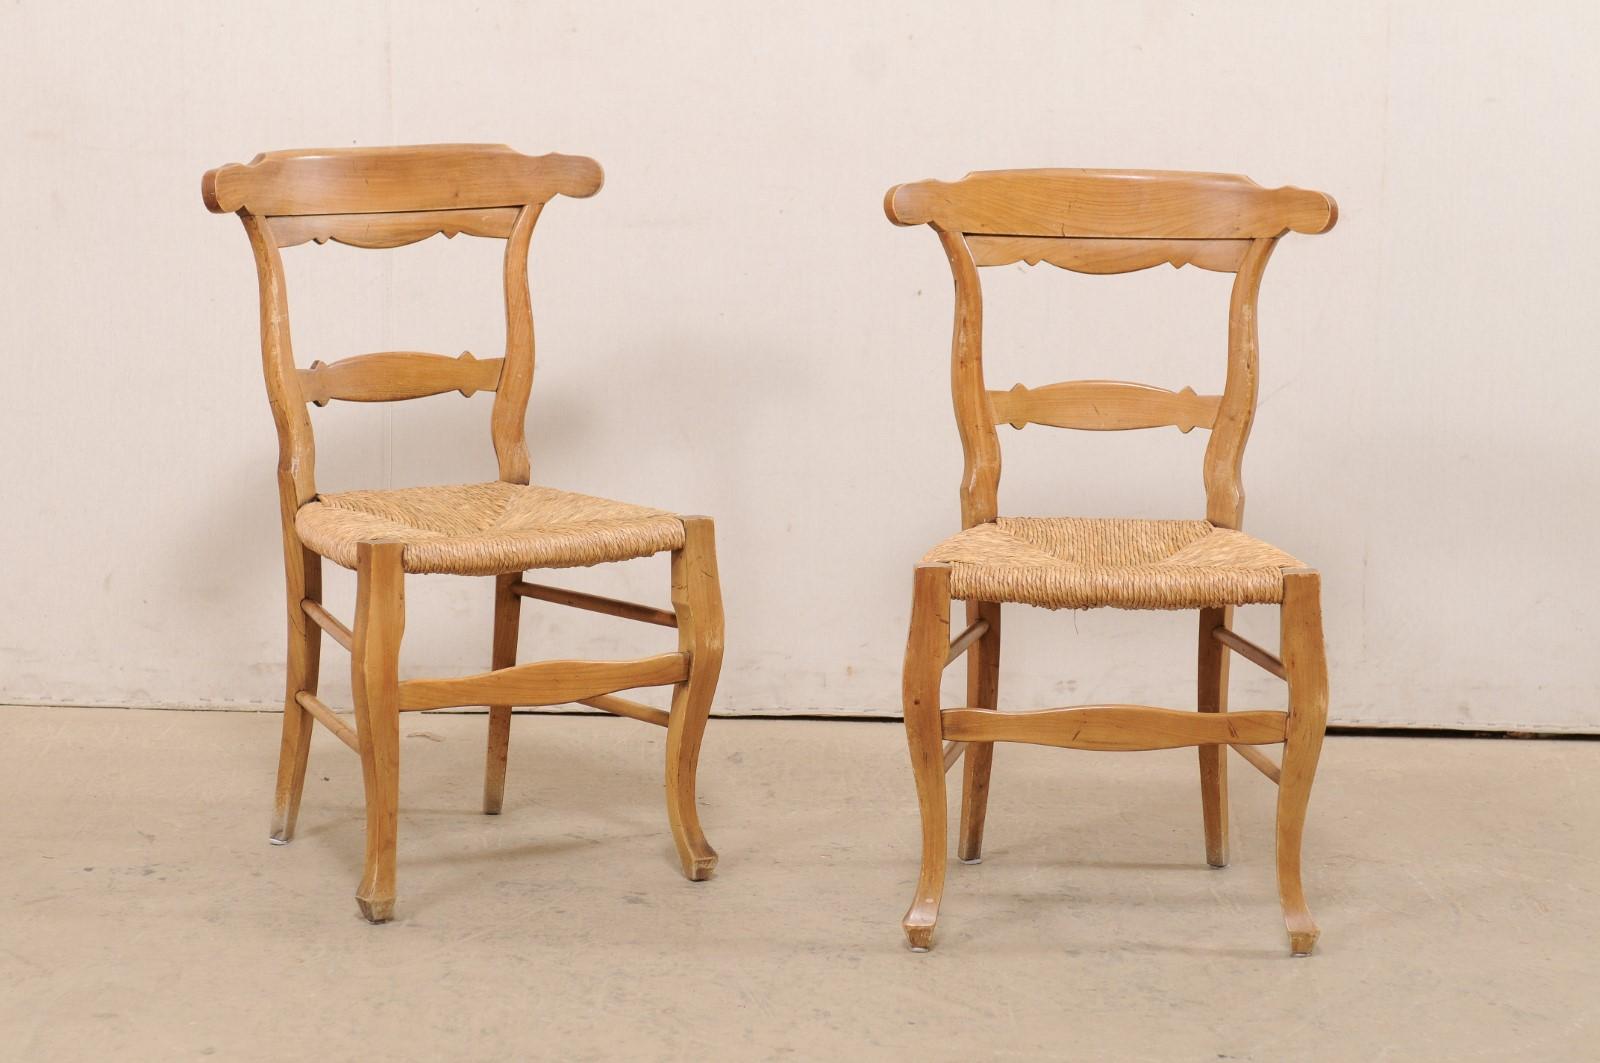 A French set of eight wooden side chairs with rush seats from the early to mid 20th century. This set of chairs from France each feature curvy carved-wood ladder-style backs, and hand-woven rush seats. These chairs are raised upon shapely carved